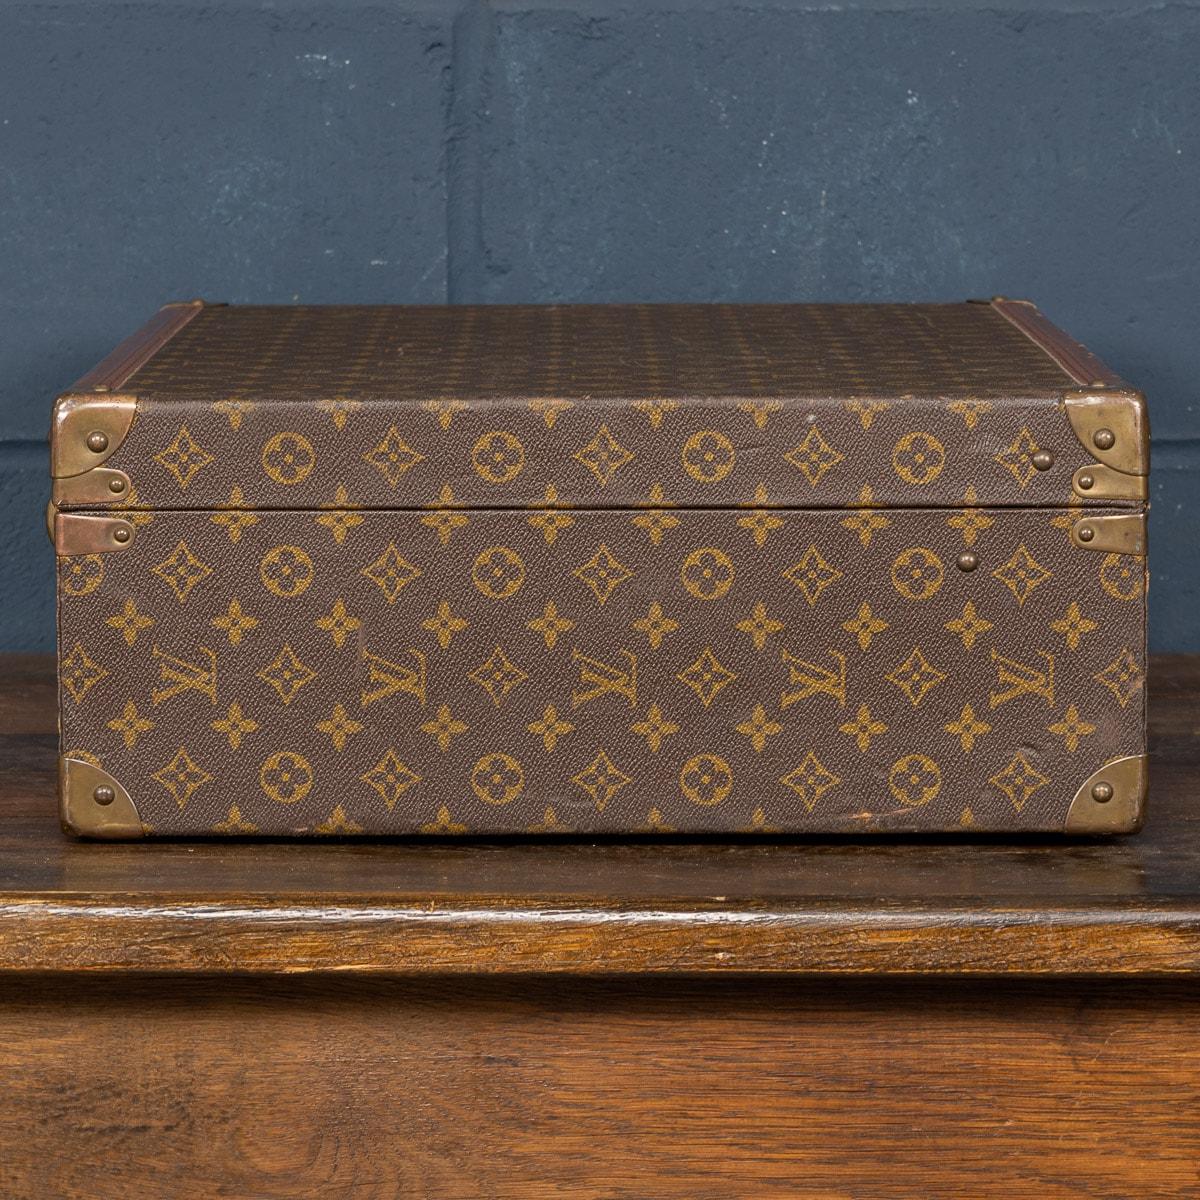 French 20th Century Louis Vuitton Suitcase In Monogram Canvas, France, c.1970